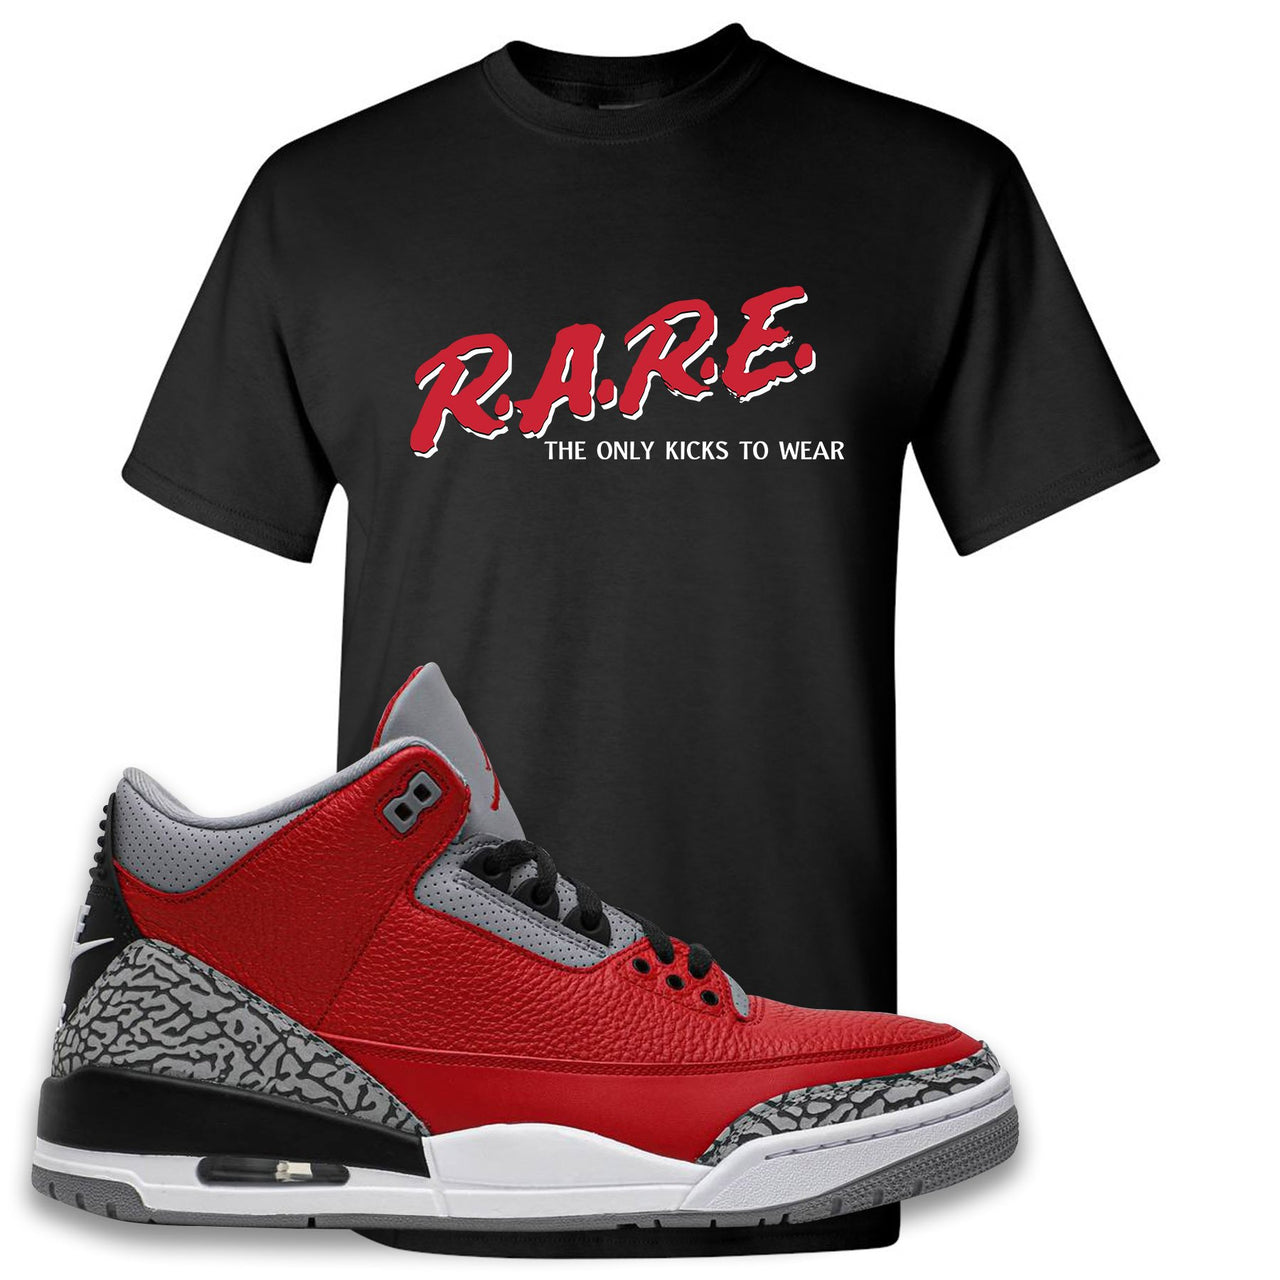 Jordan 3 Red Cement Chicago All-Star Sneaker Black T Shirt | Tees to match Jordan 3 All Star Red Cement Shoes | Rare